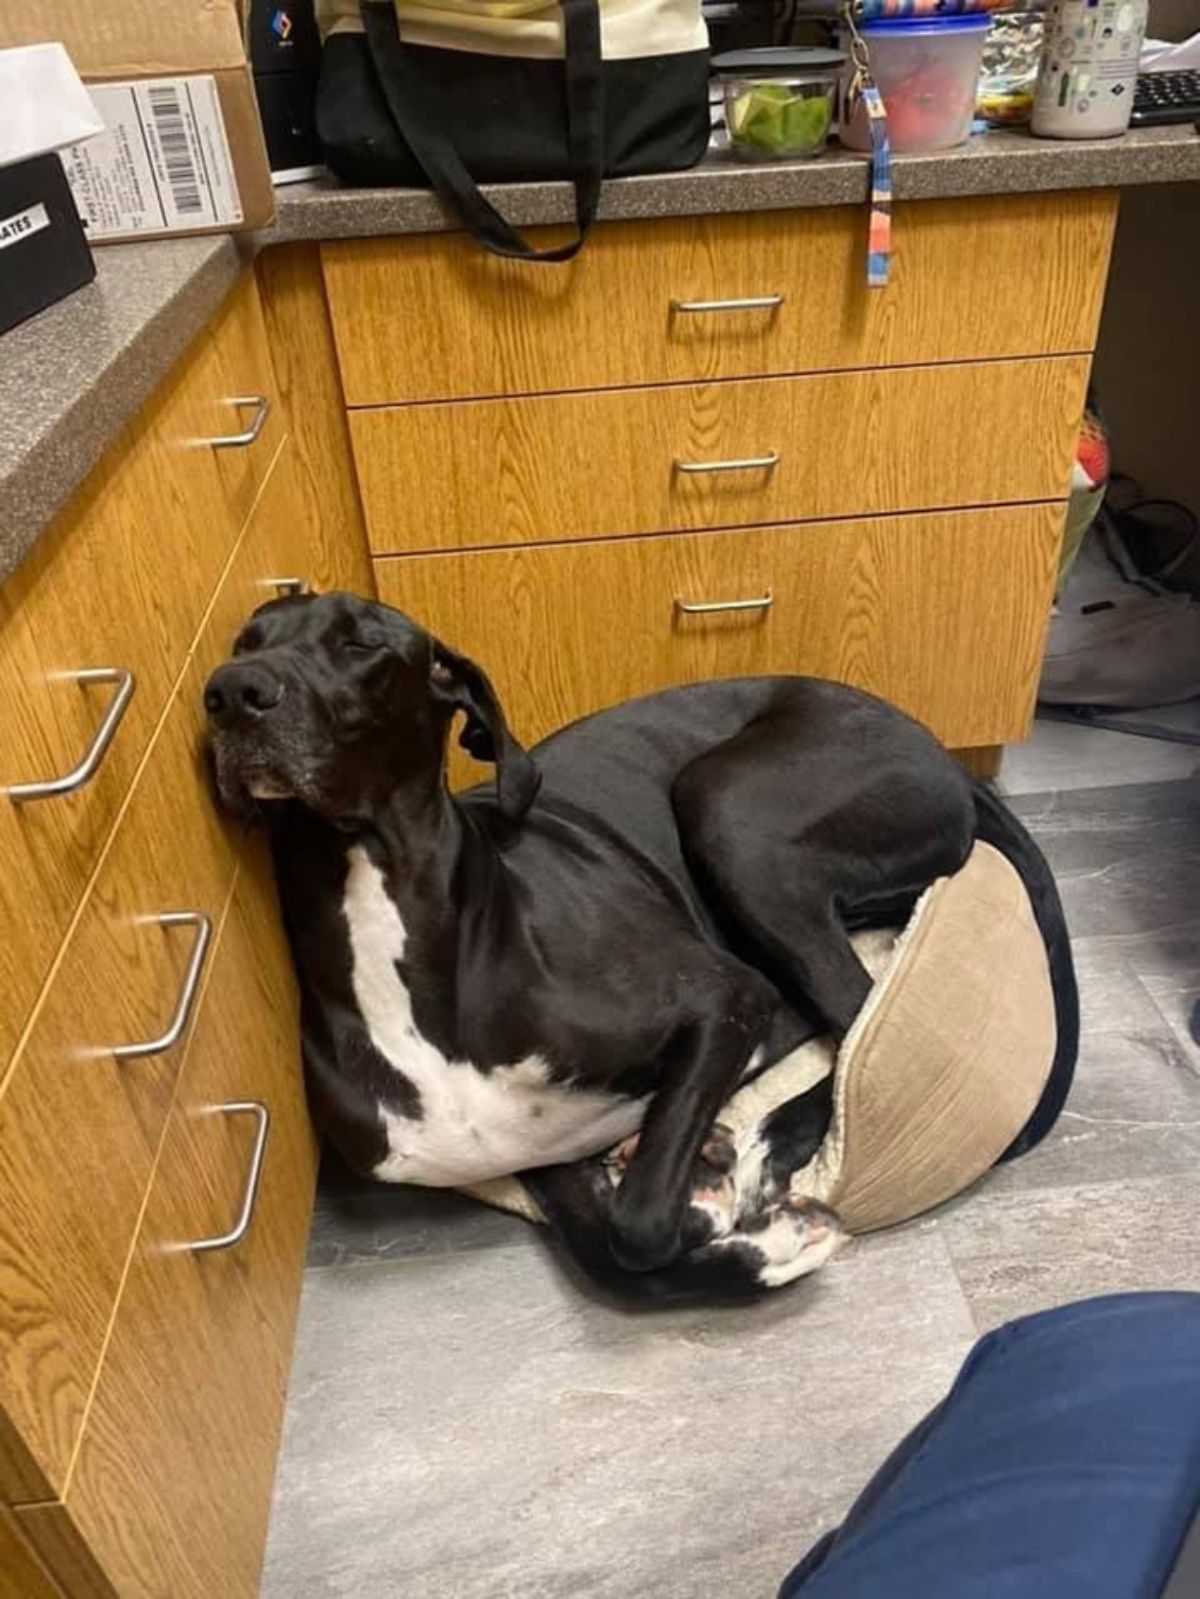 large black and white dog sleeping in a cat bed that has tipped over and the face is against brown kitchen cabinets